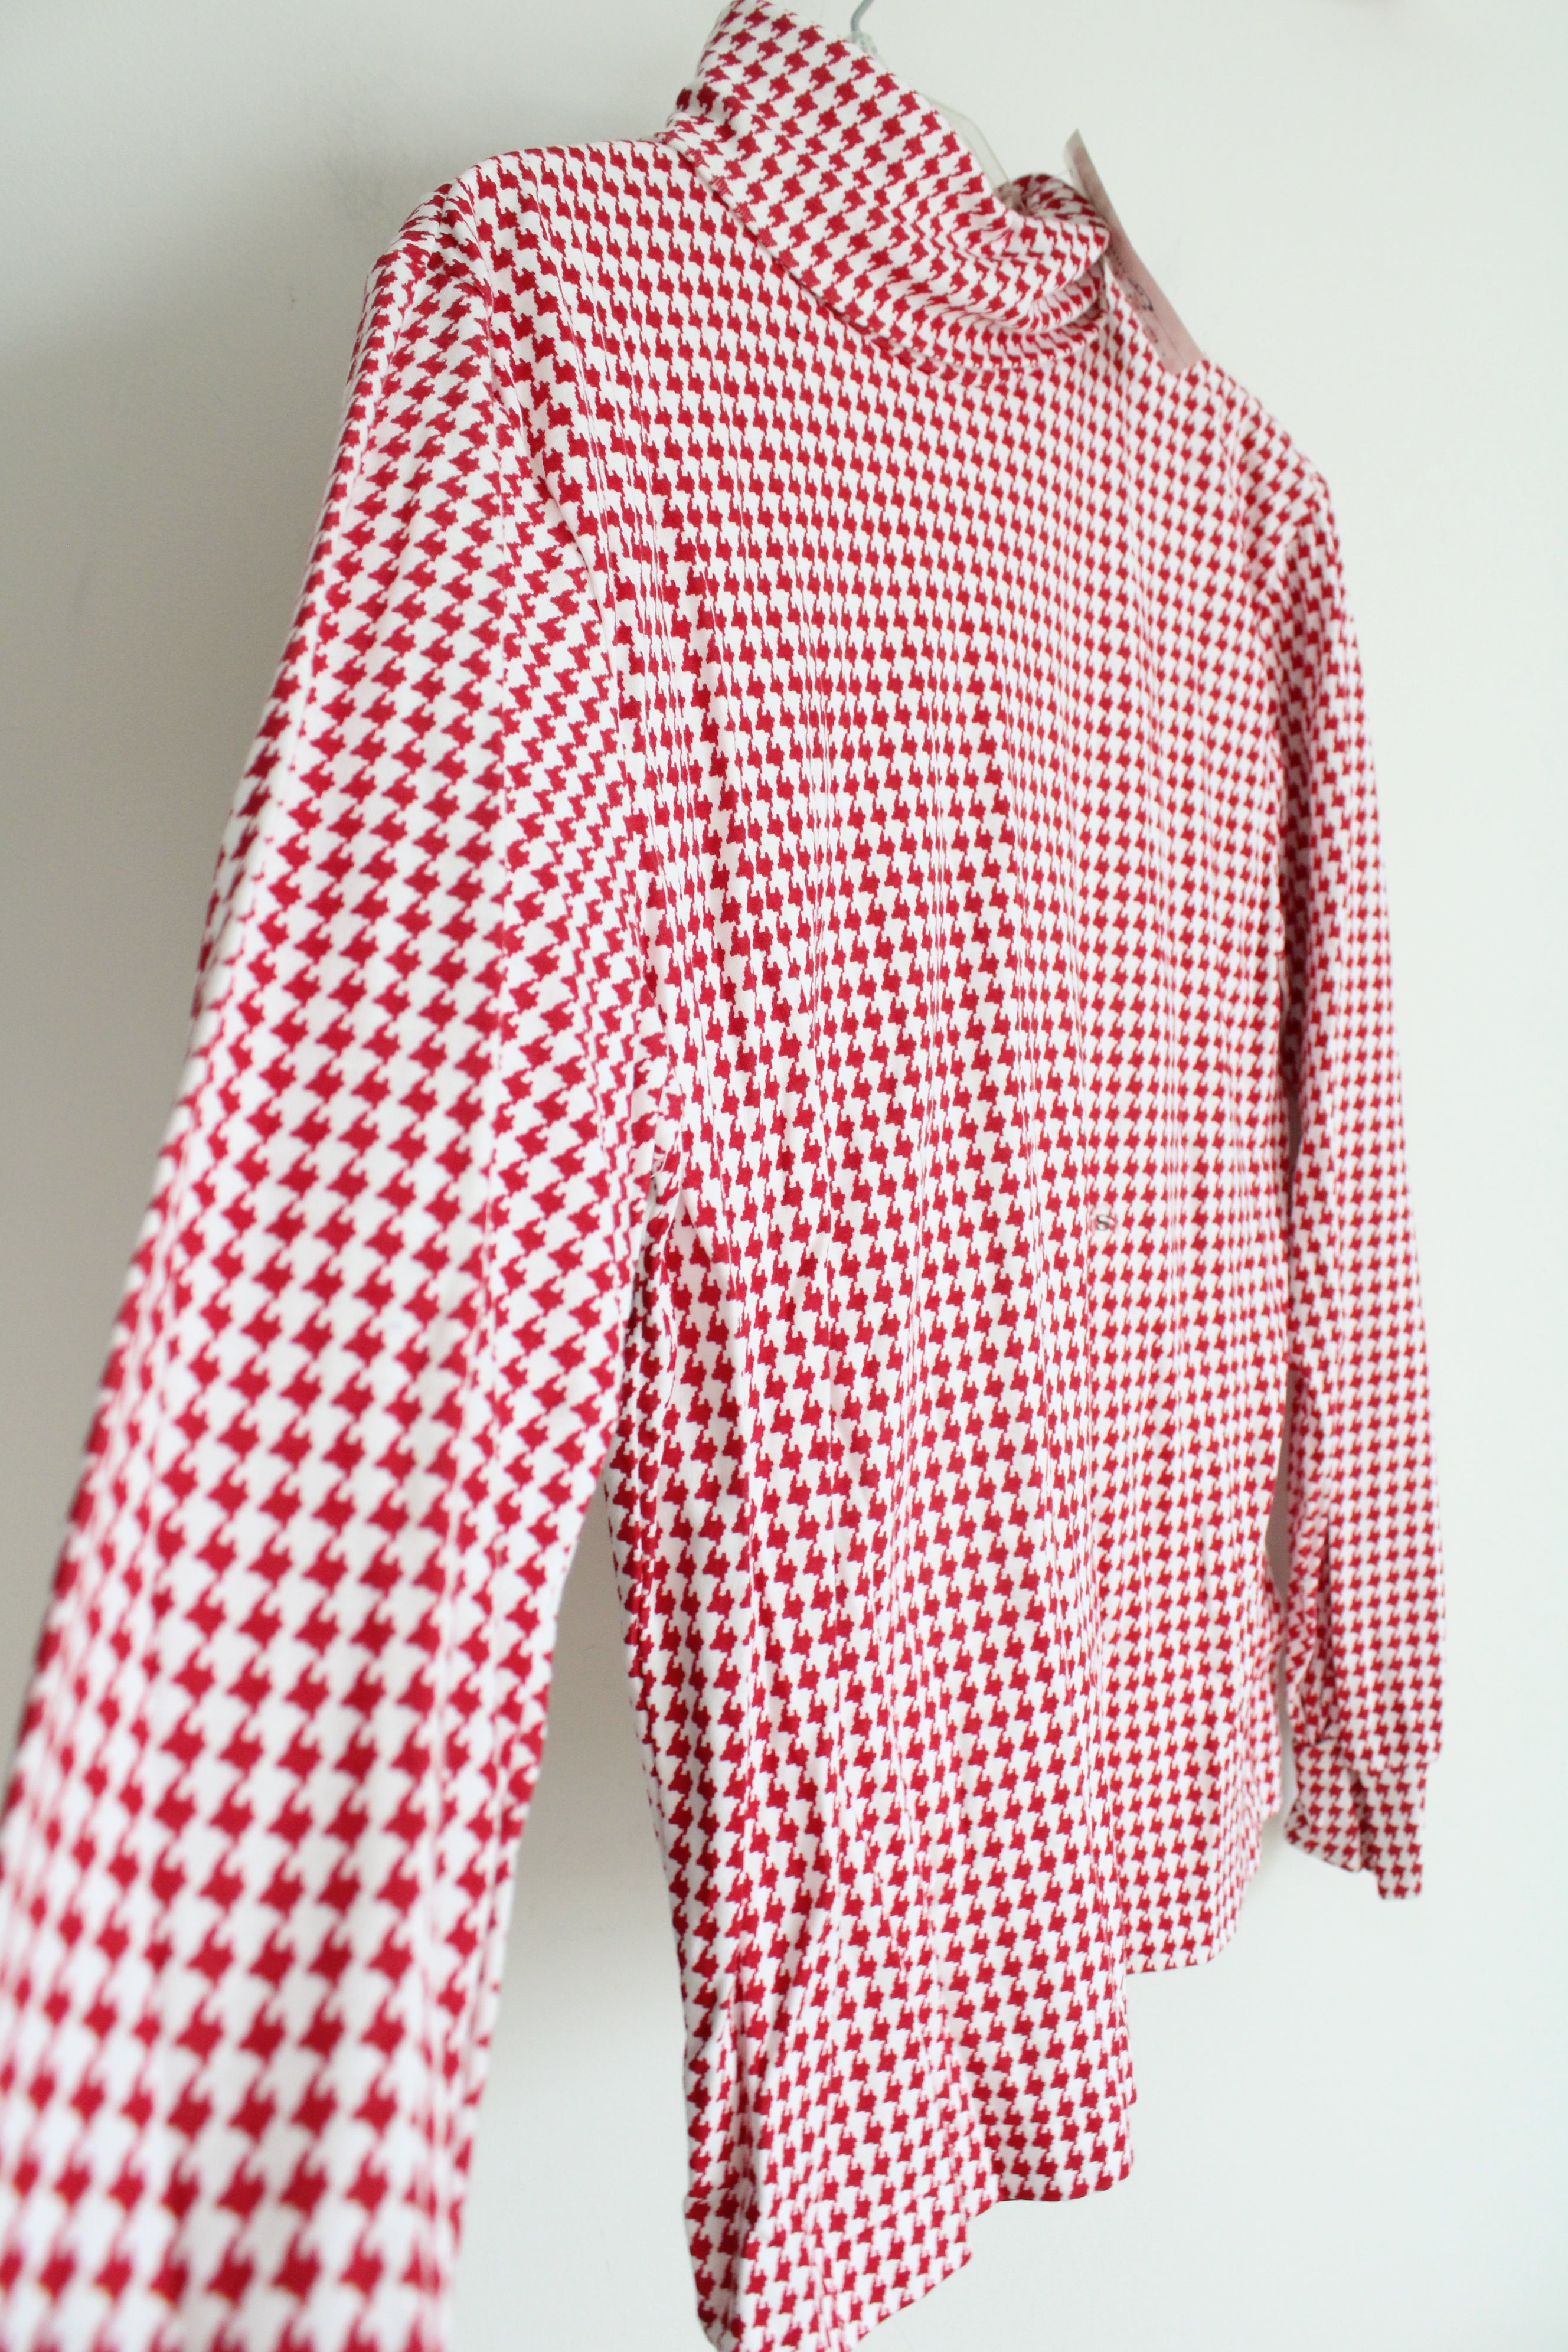 NEW Hasting & Smith Red White Houndstooth Turtleneck Shirt | S Petite